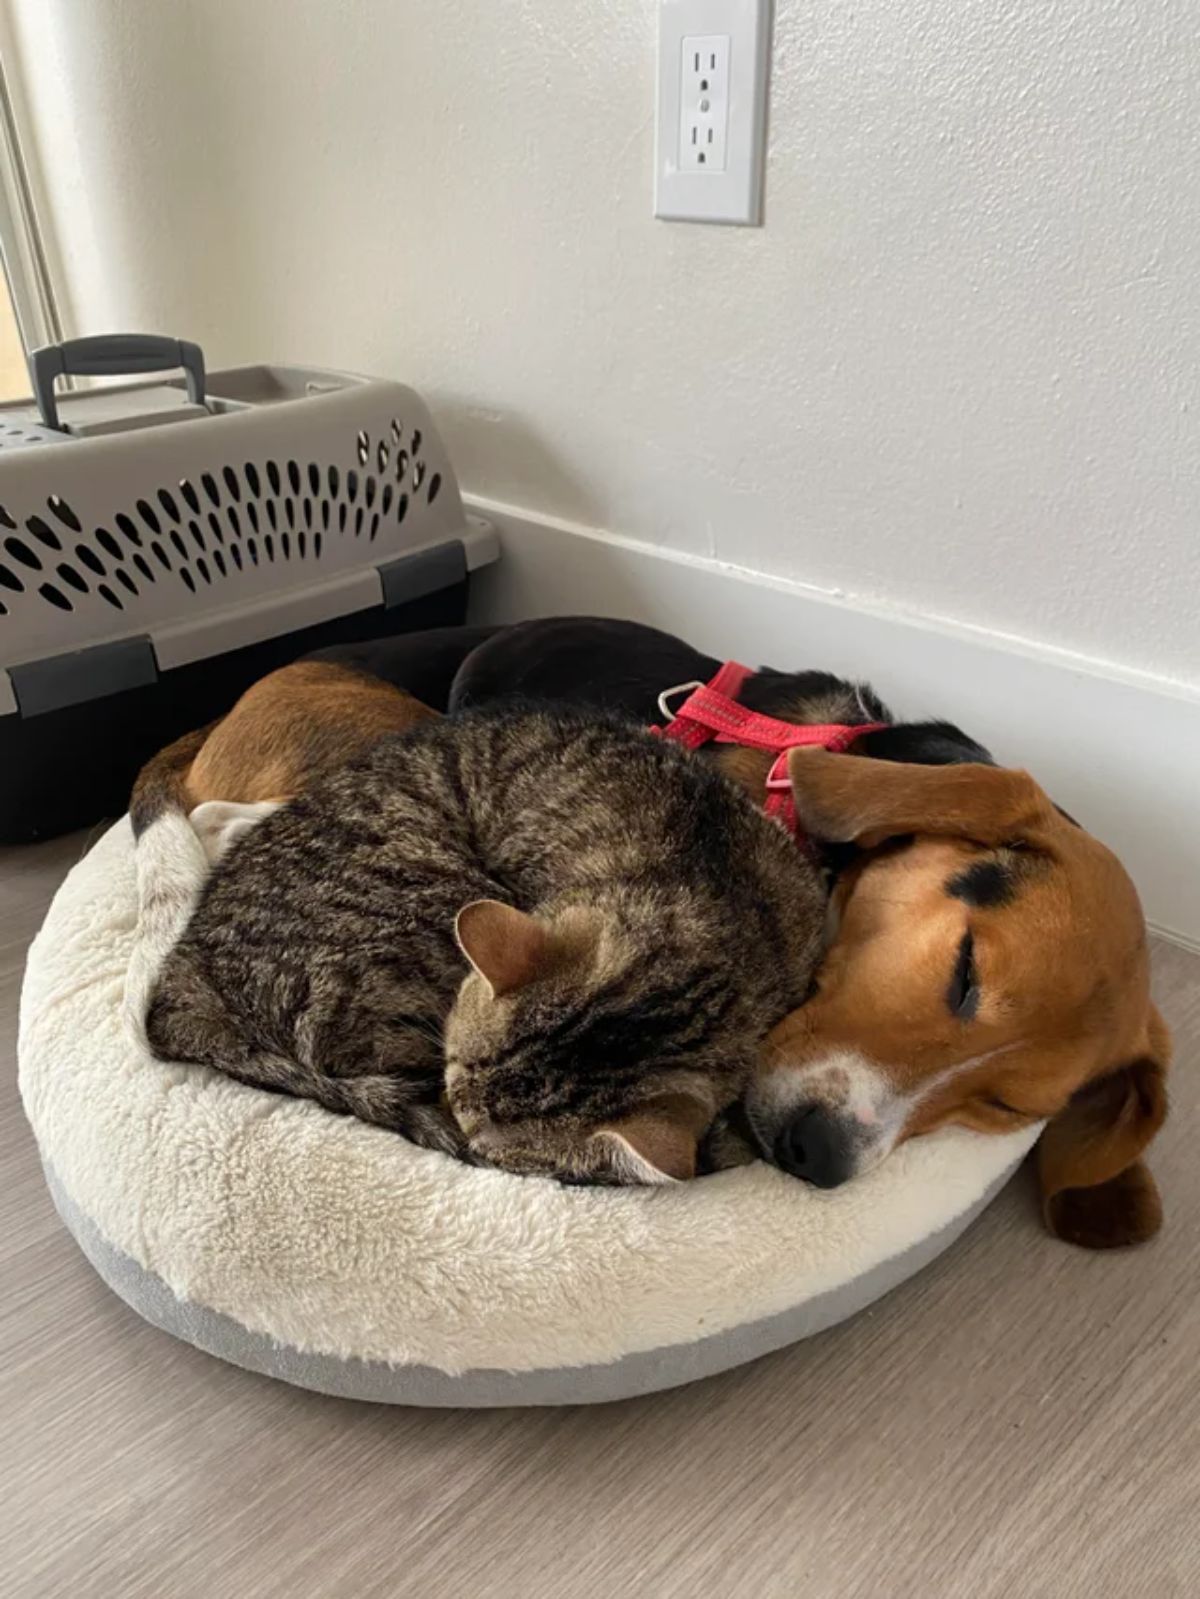 grey tabby cat and a brown black and white beagle sleeping cuddled in a white and grey cat bed